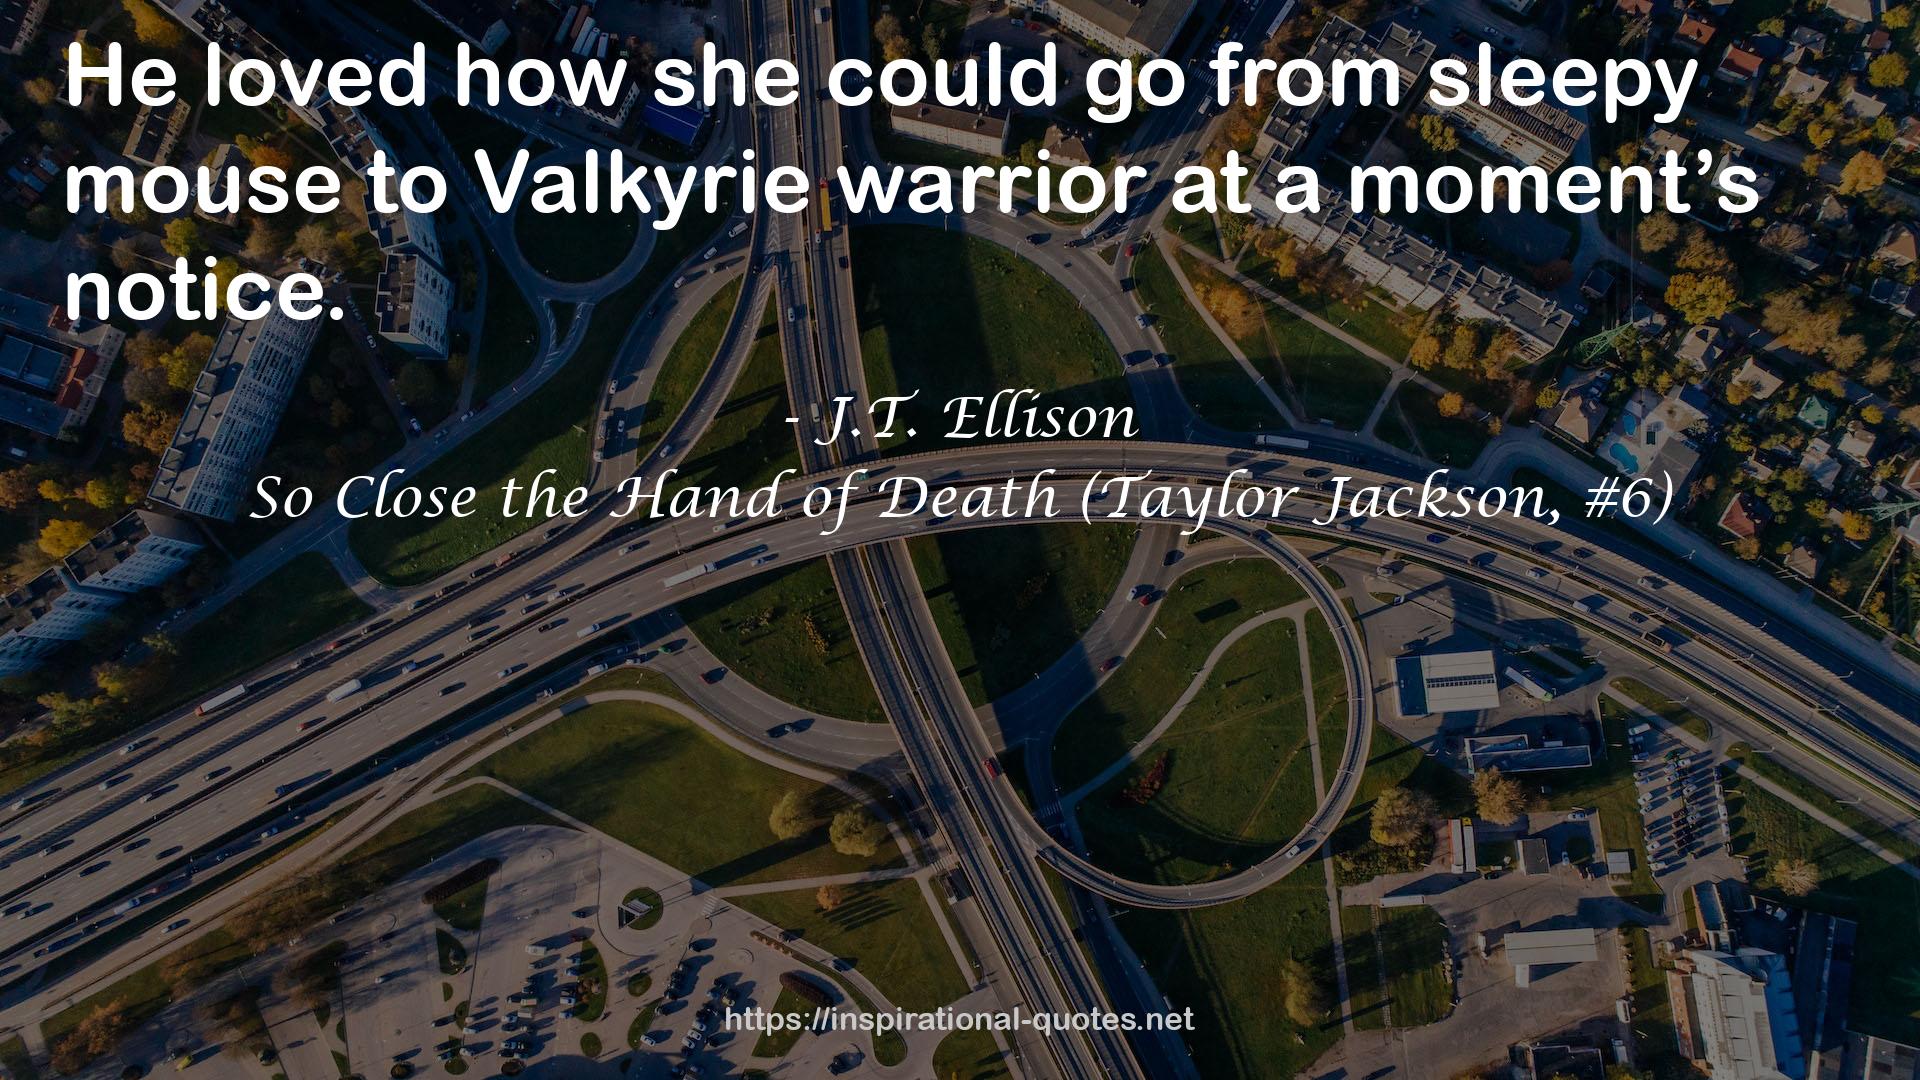 So Close the Hand of Death (Taylor Jackson, #6) QUOTES